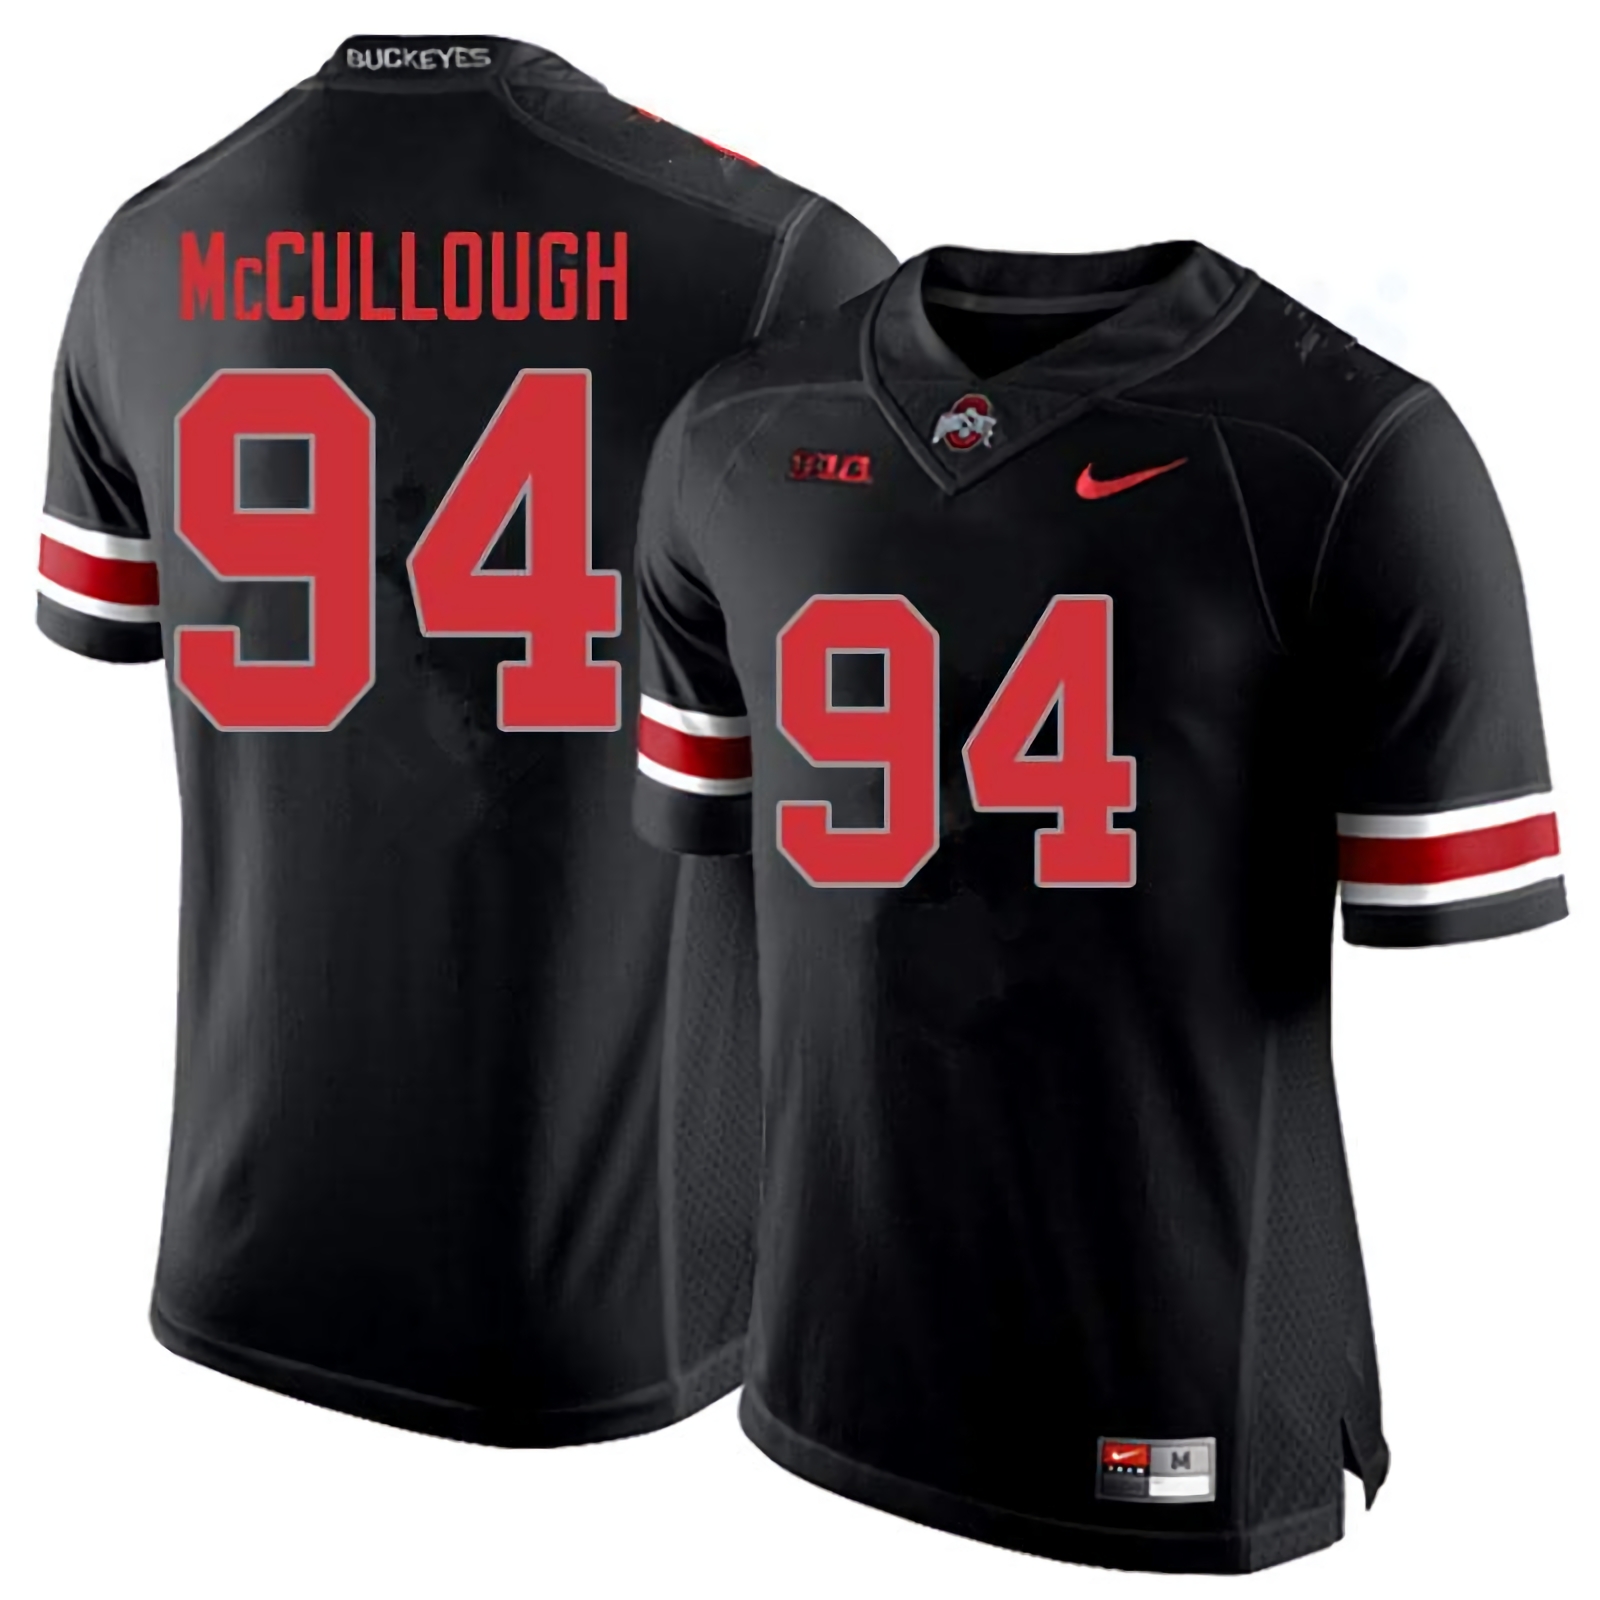 Roen McCullough Ohio State Buckeyes Men's NCAA #94 Nike Blackout College Stitched Football Jersey AWM4556HF